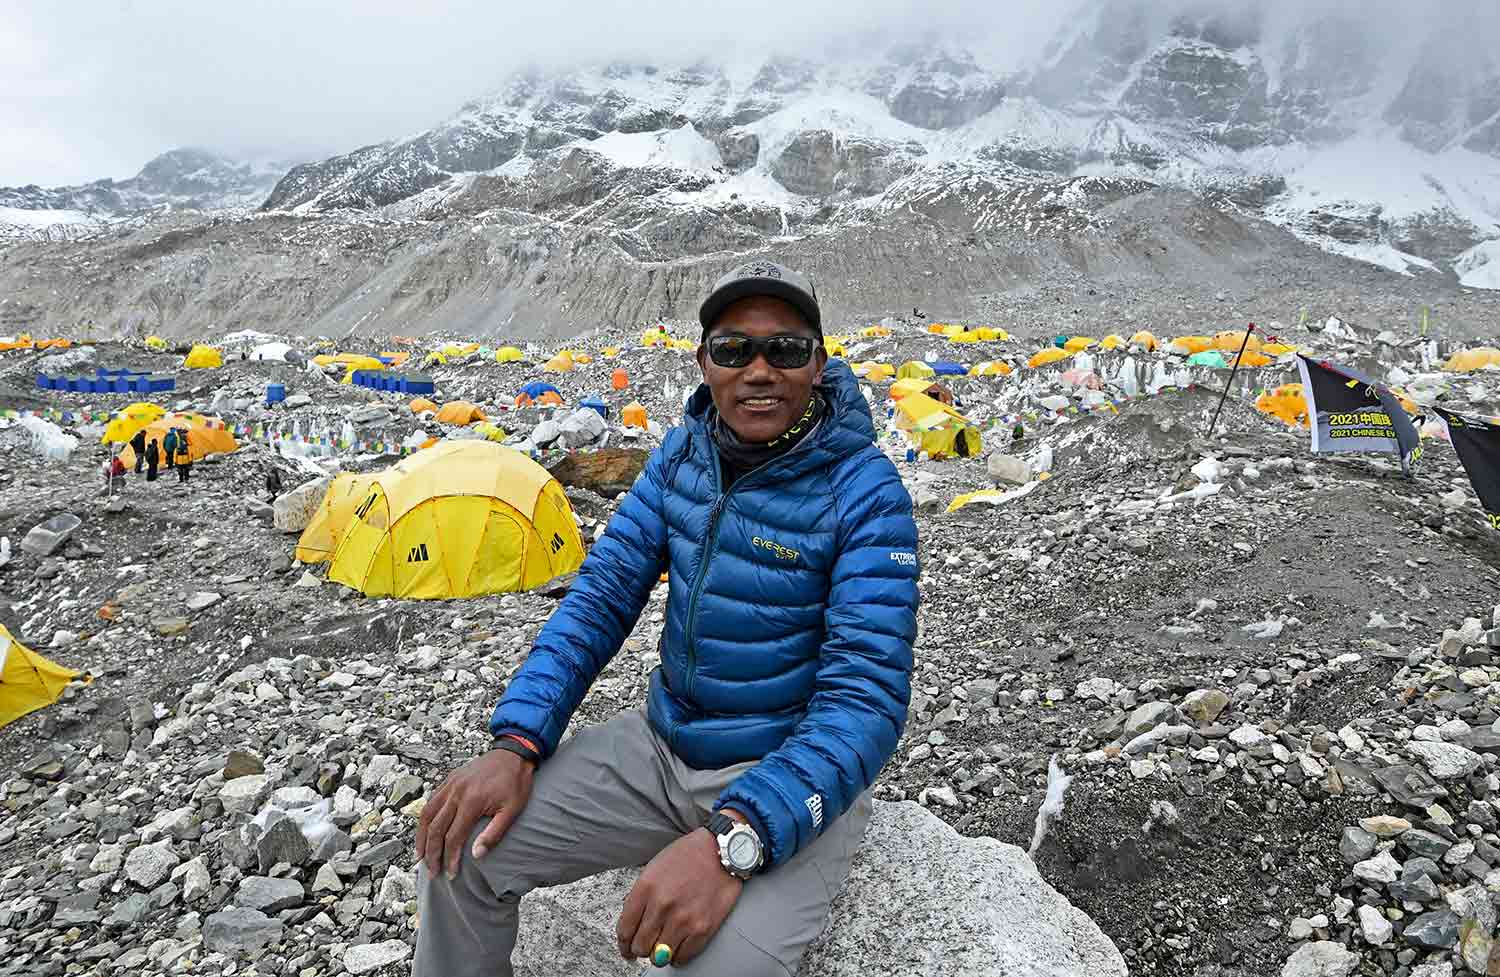 Kami Rita sits and poses on a boulder at Everest base camp with many tents in the background.